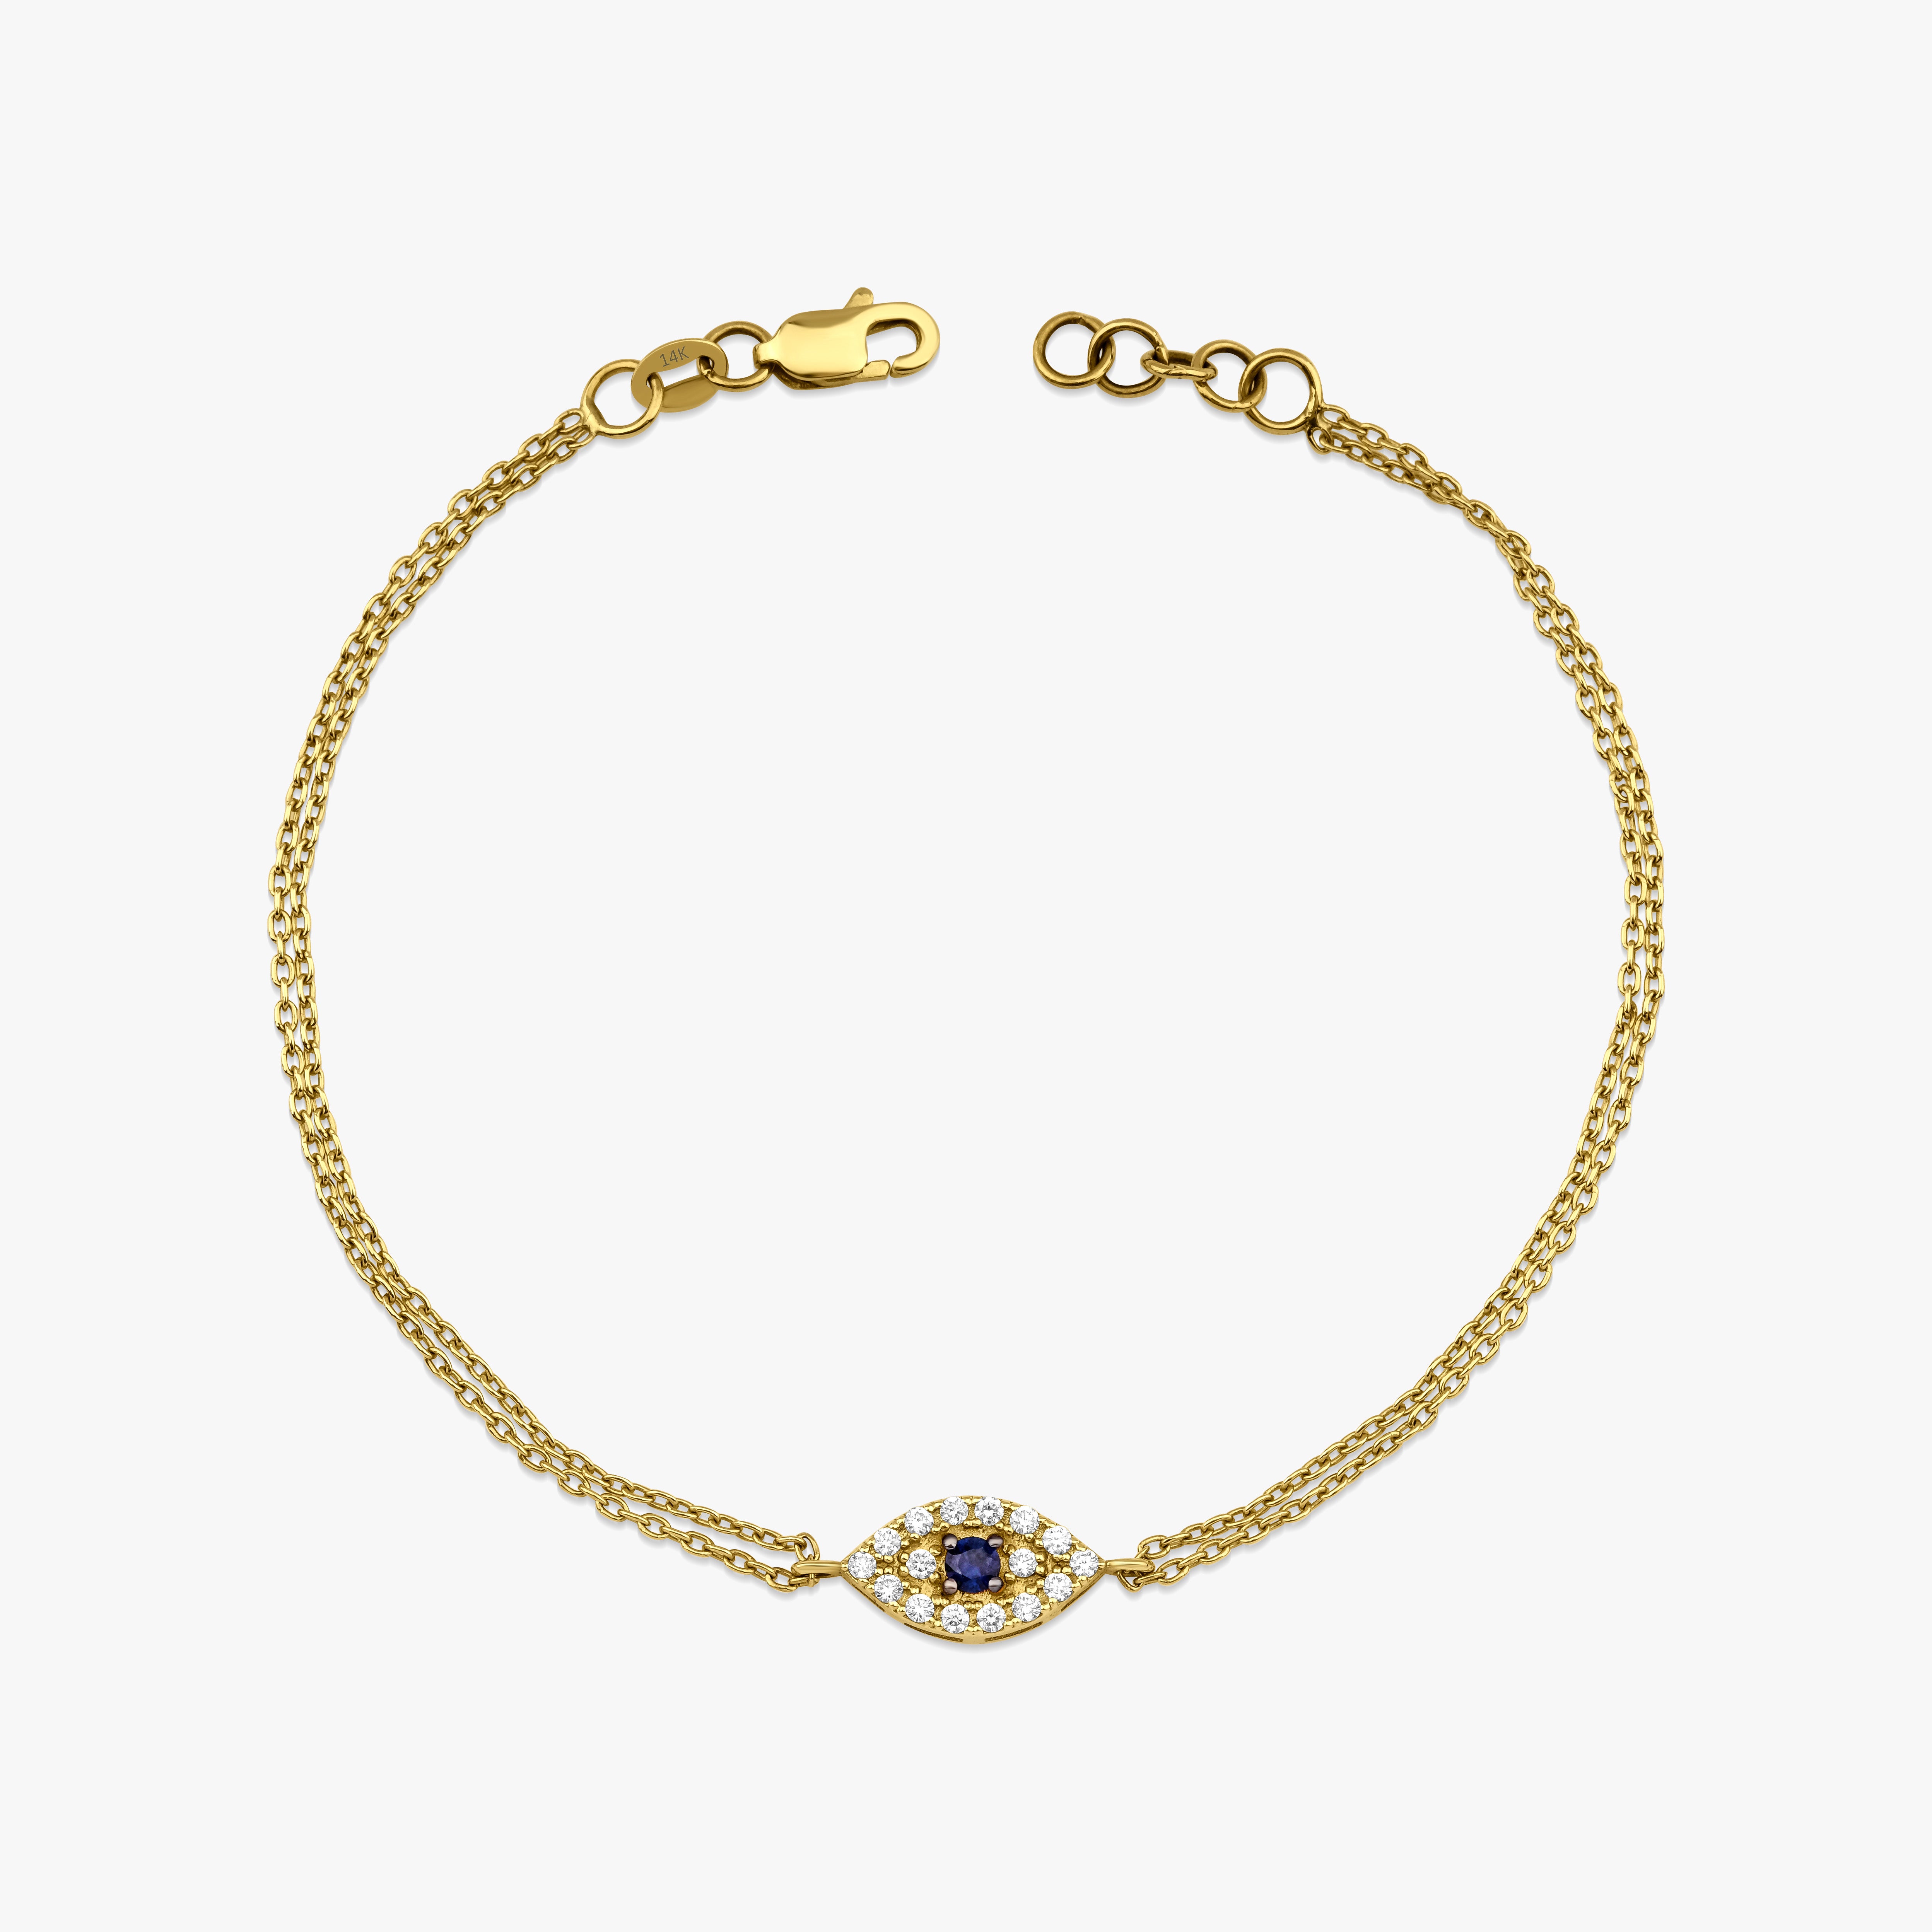 Blue Sapphire and Diamond Evil Eye Bracelet Available in 14K Gold and 18K Gold